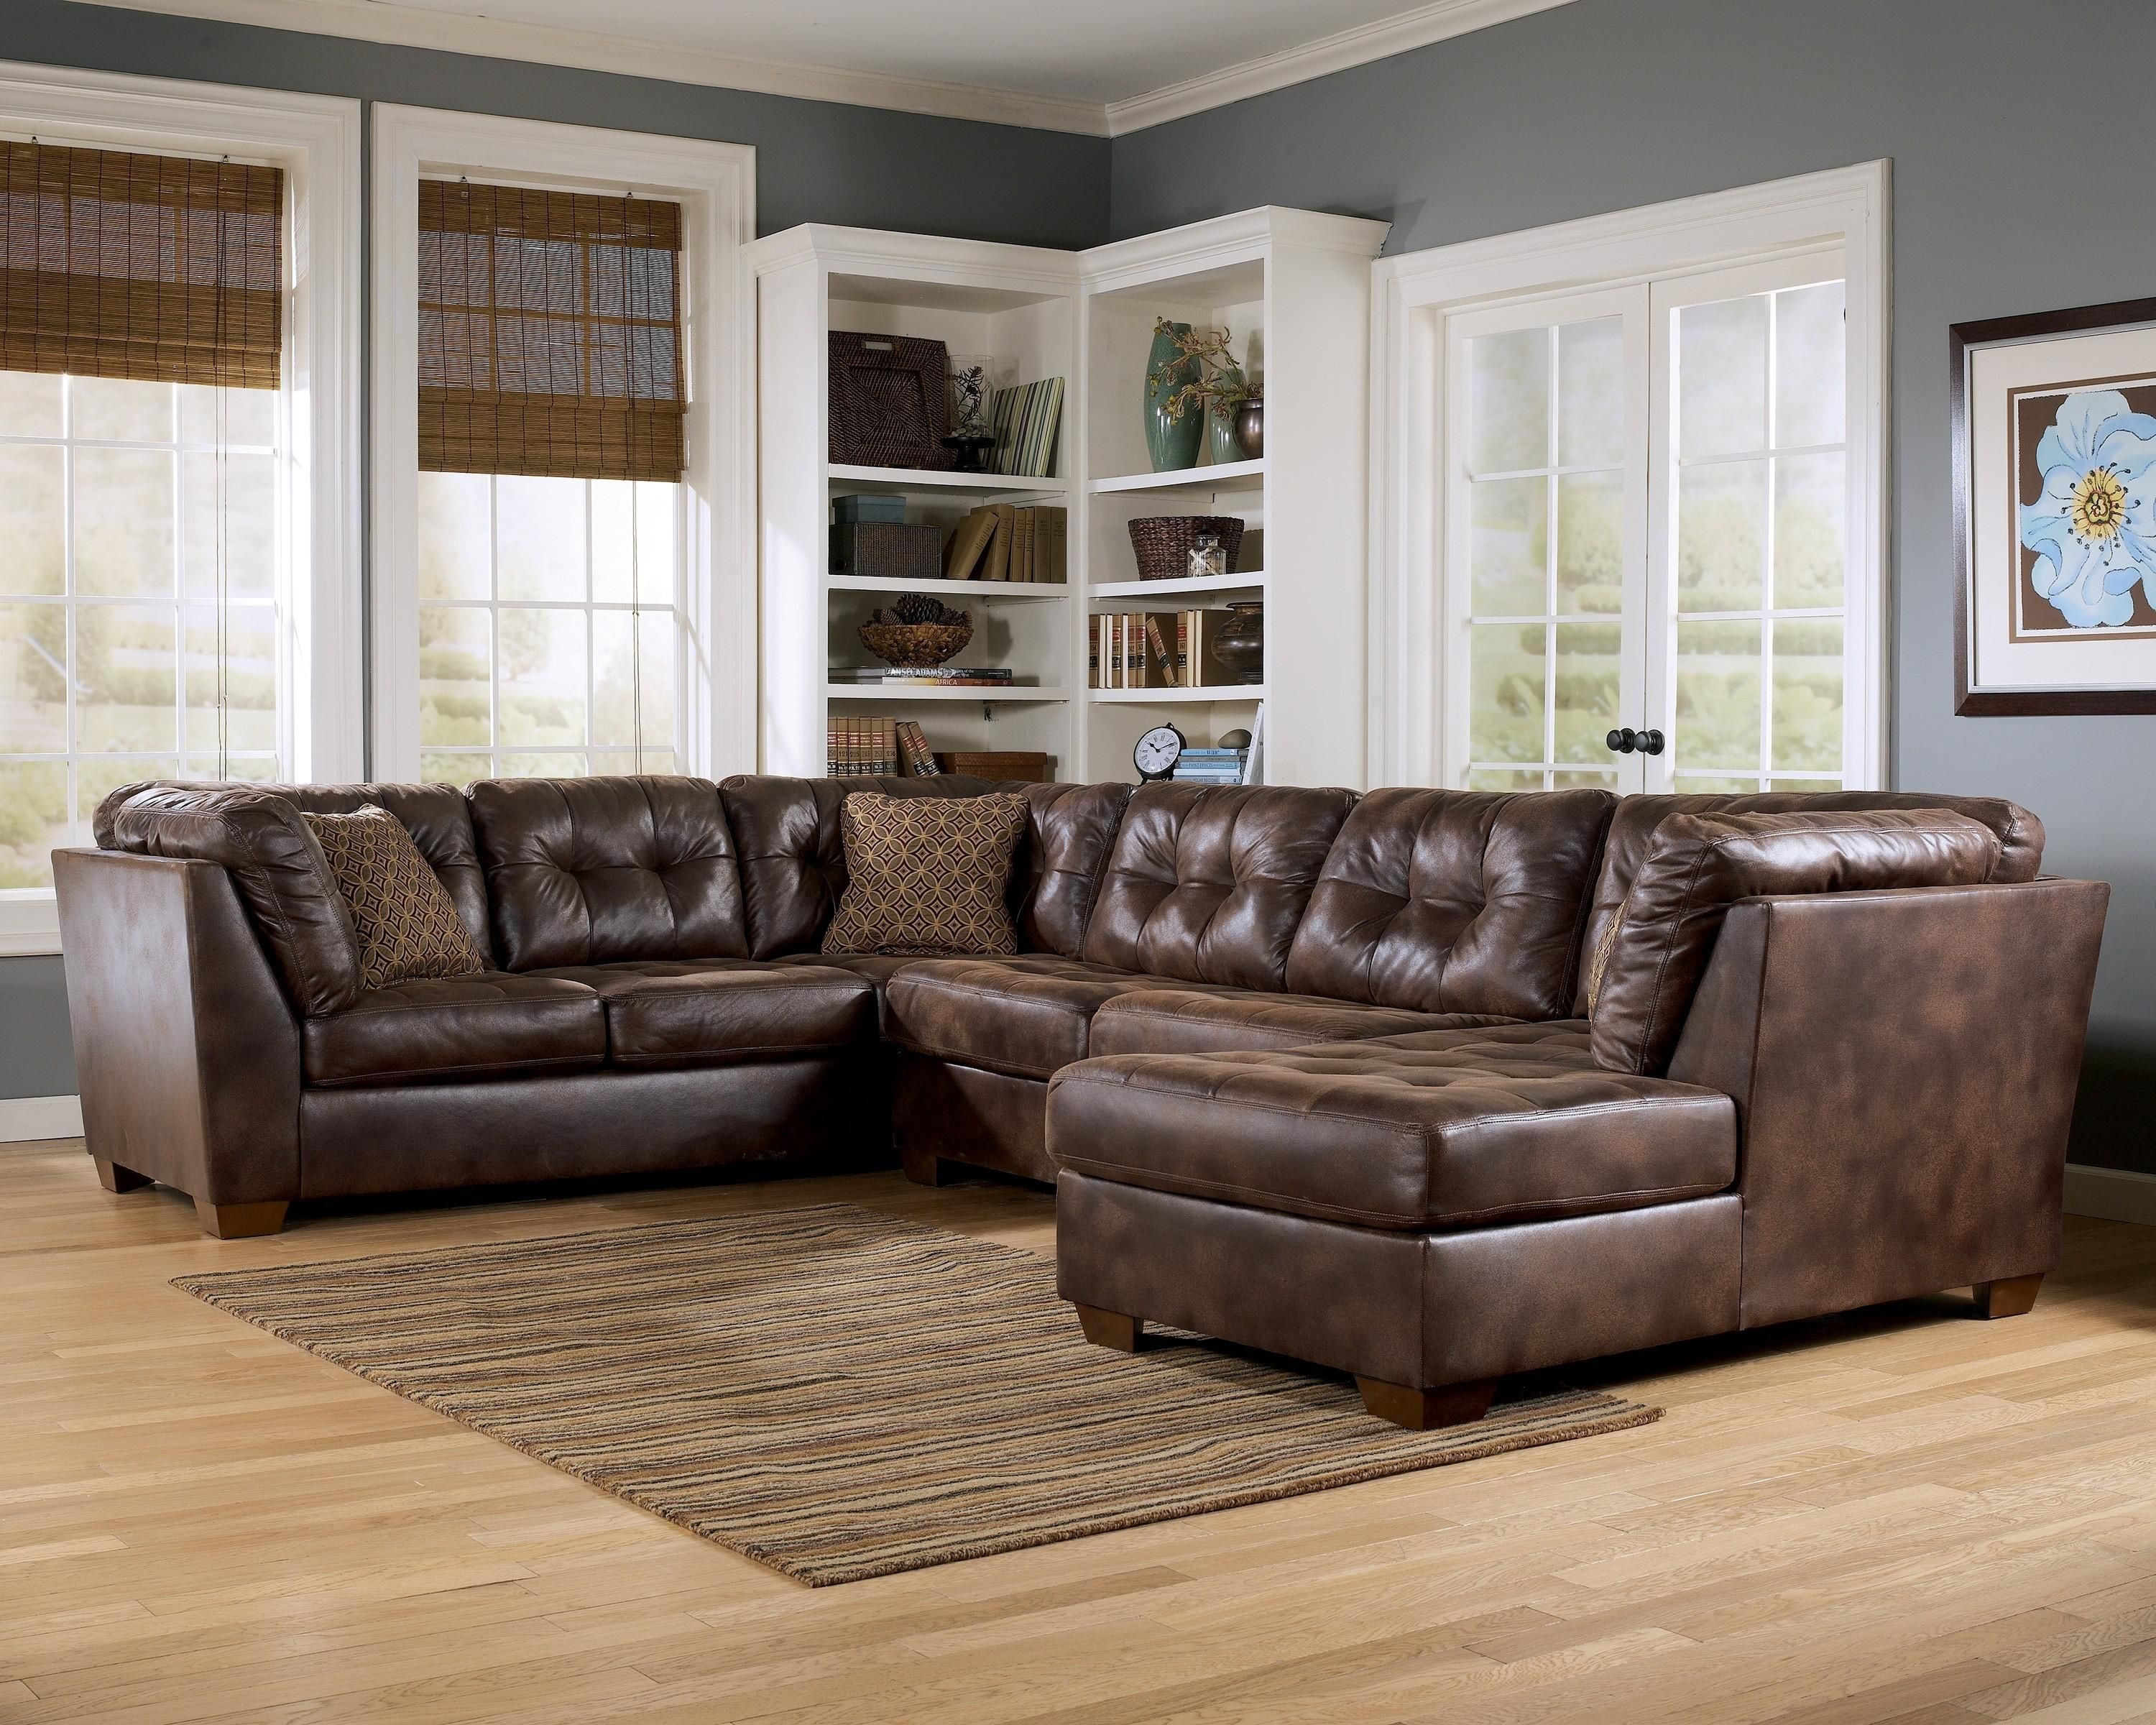 Sofas Center : Rustic Sectional Sofas Wonderful Western Style With Intended For Western Style Sectional Sofas (View 10 of 20)